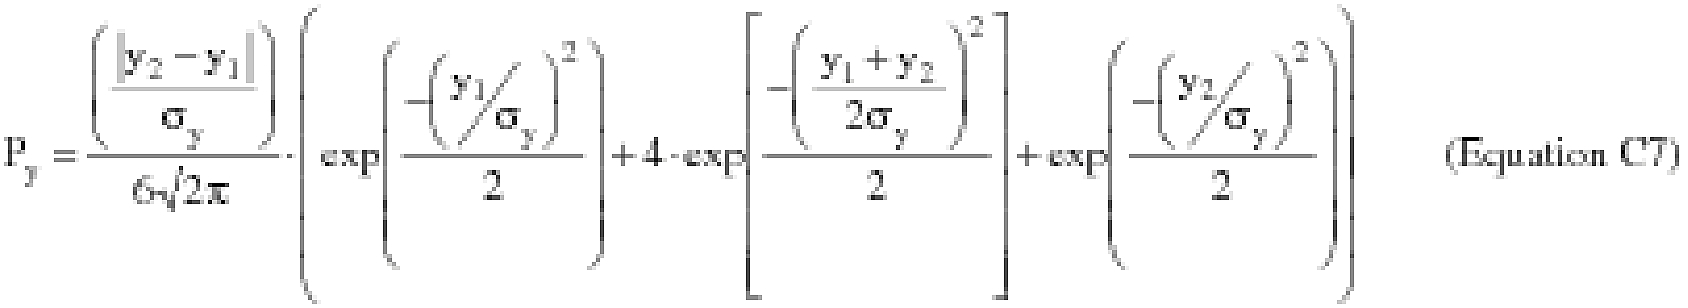 Equation for exp = exponential function (ex)